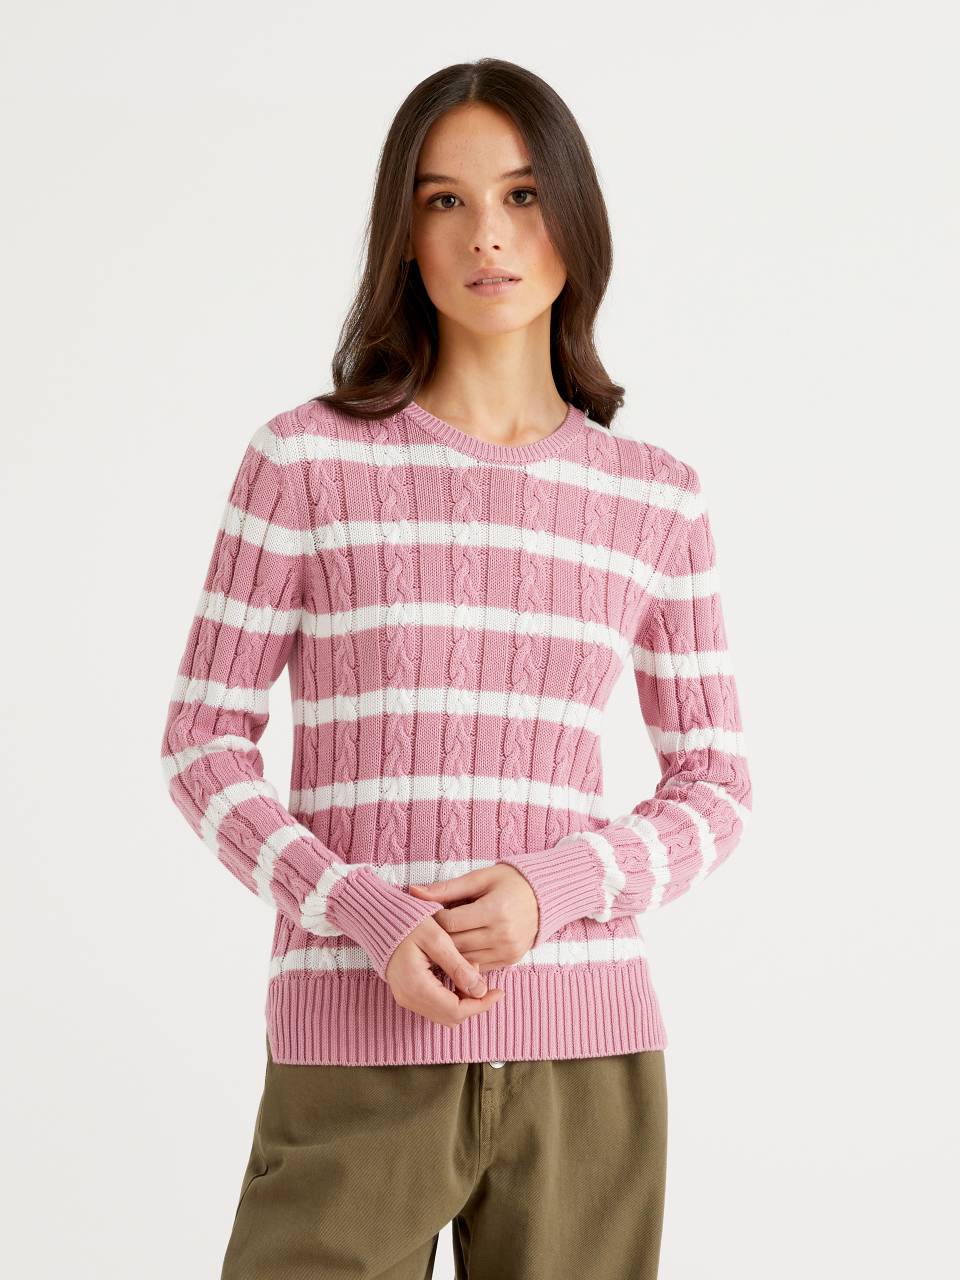 Benetton Cable knit sweater 100% cotton. 1